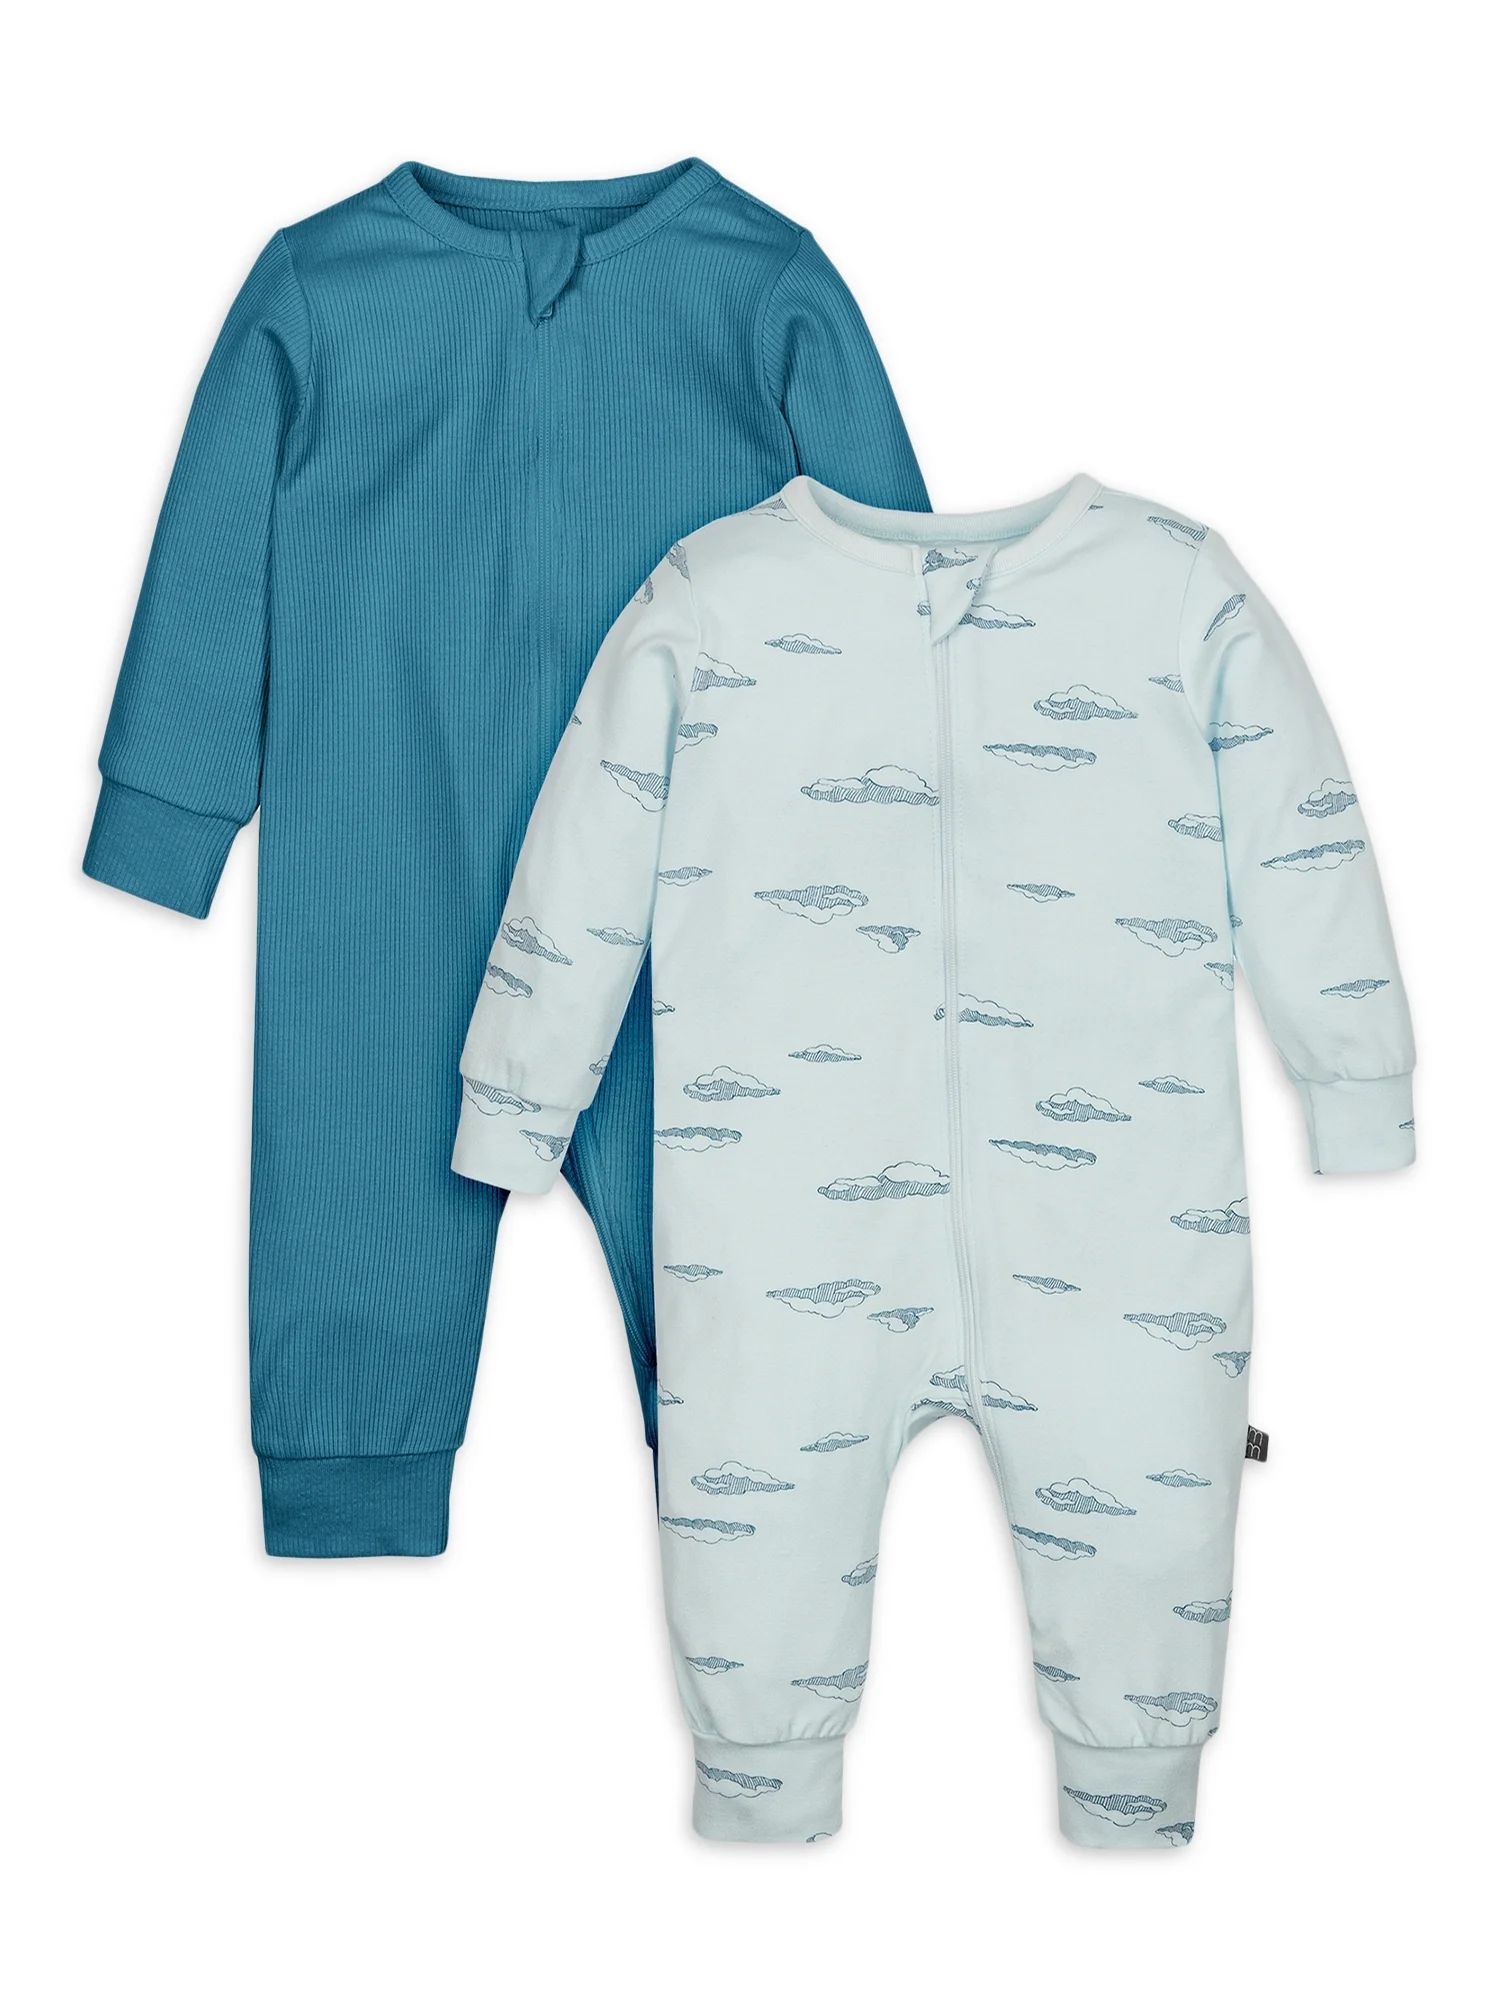 Modern Moments by Gerber Baby Unisex Super Soft Coveralls, 2-Pack, Sizes Newborn - 12 Months | Walmart (US)